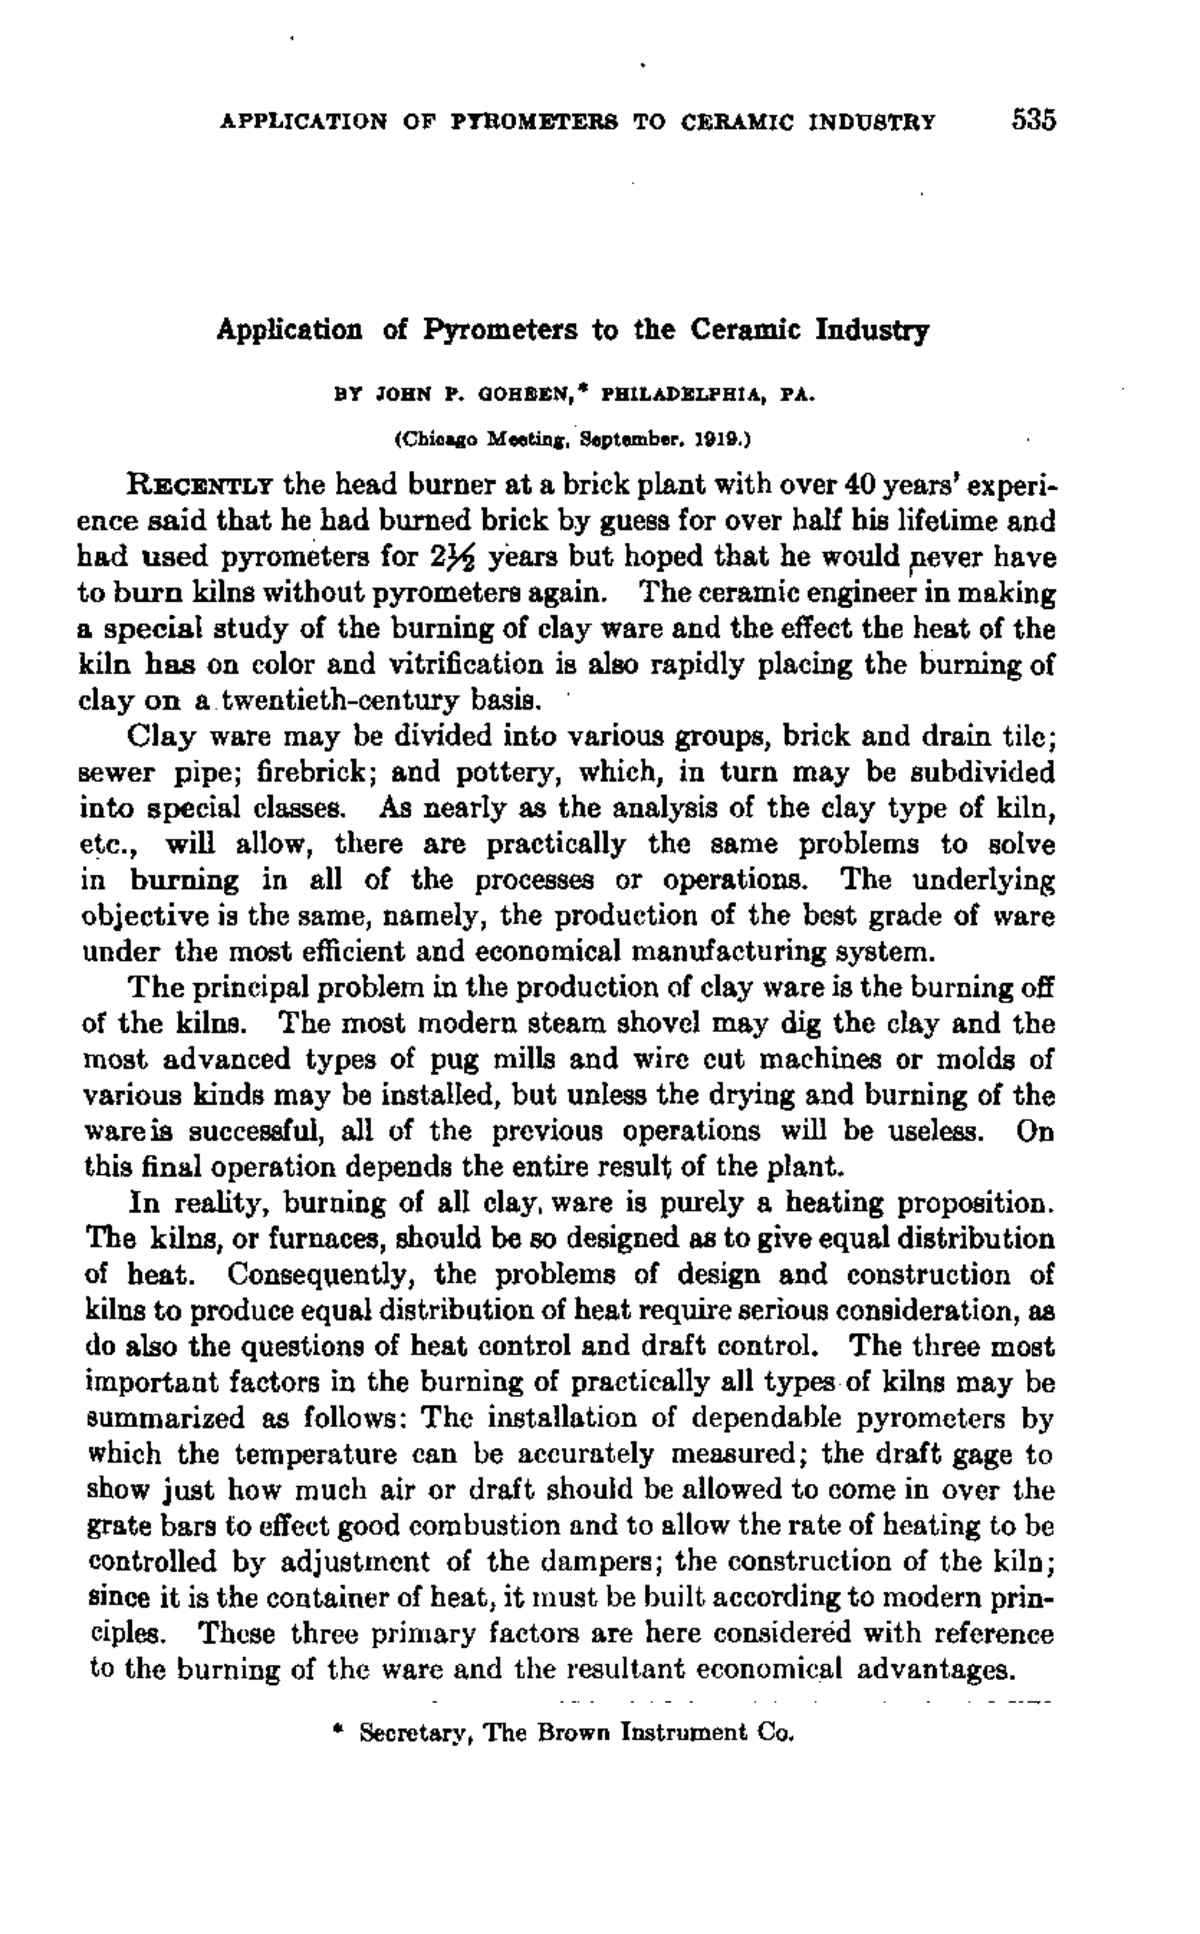 Optical and Radiation Pyrometry, Pyrometry: The Papers and Discussion of a  Symposium on Pyrometry Held by the American Institute of Mining and  Metallurgical Engineers at Its Chicago Meeting, September, 1919